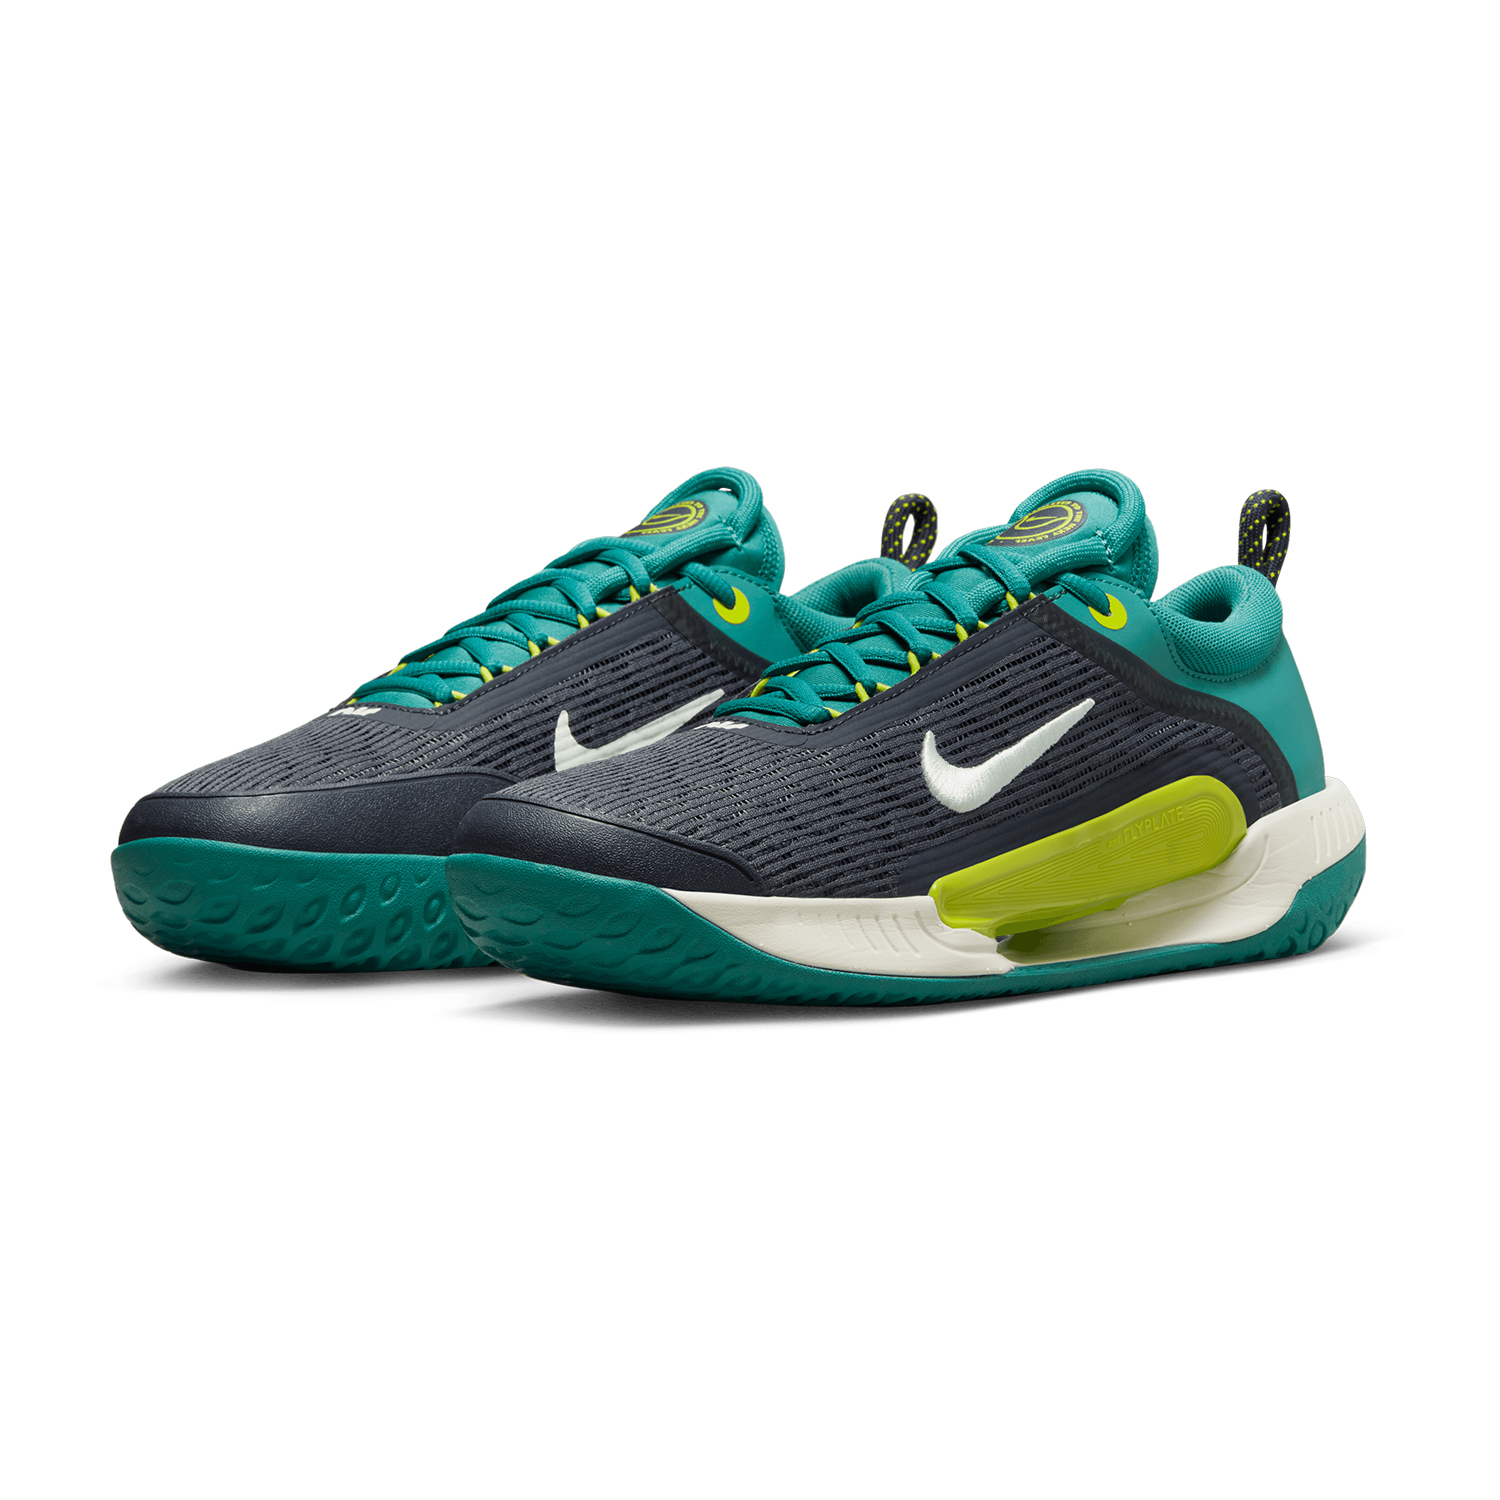 Nike Court Zoom NXT HC - Mineral Teal/Sail/Gridiron/Bright Cactus